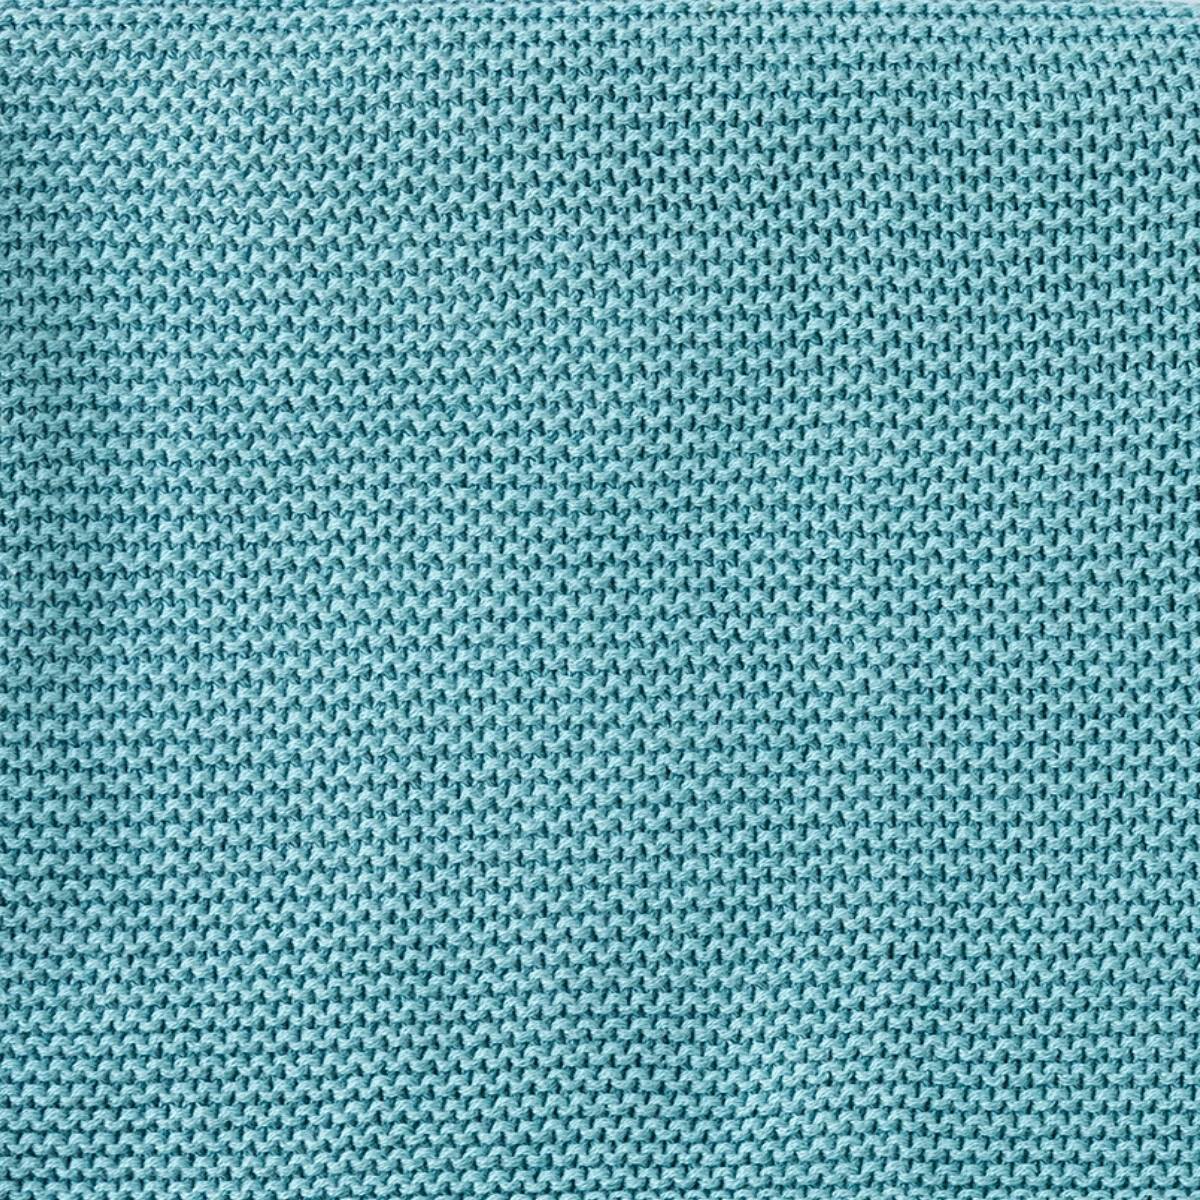 Personalised Knitted Baby Blanket - Teal Knitted Baby Blanket Little Poppet Store 